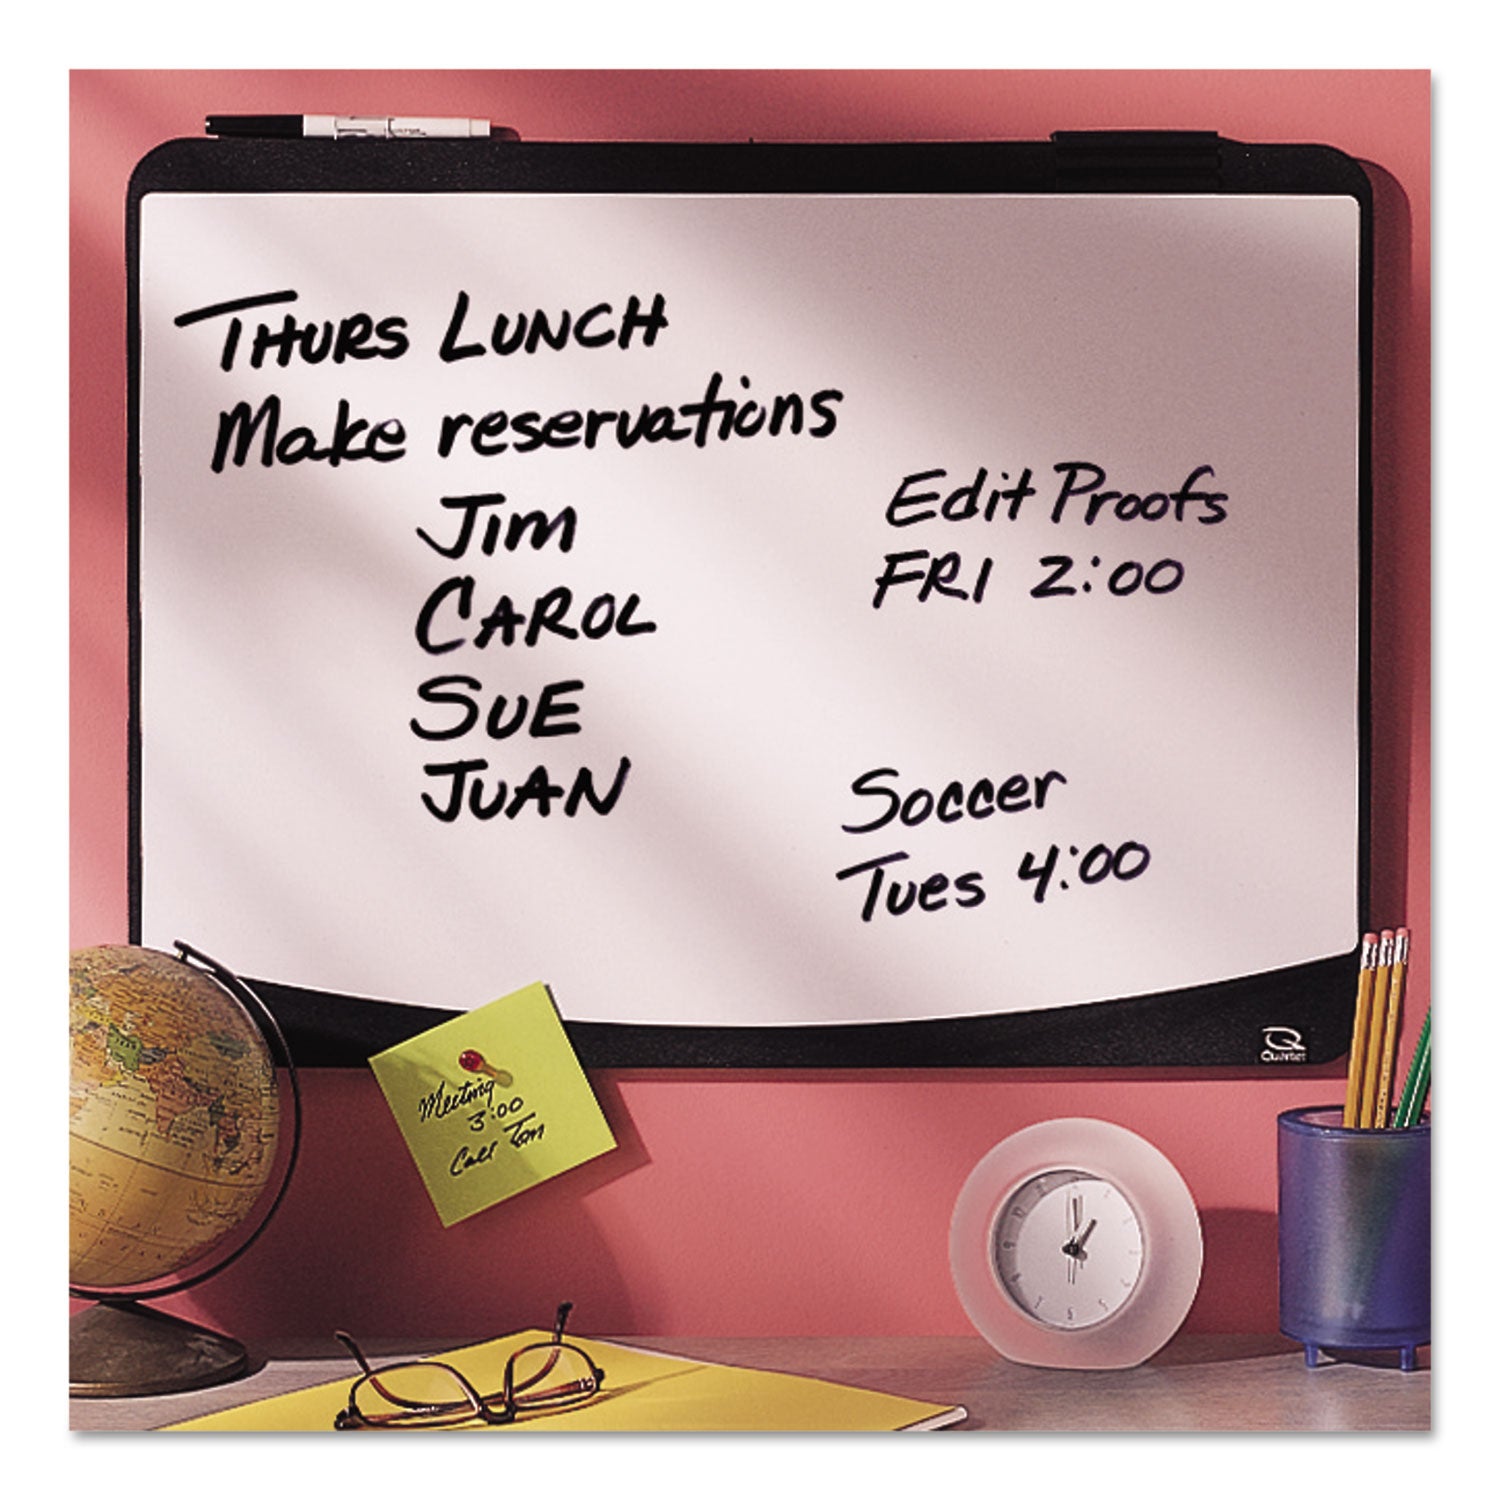 Tack and Write Board, 25.5 x 17.5, Black/White Surface, Black Plastic Frame - 